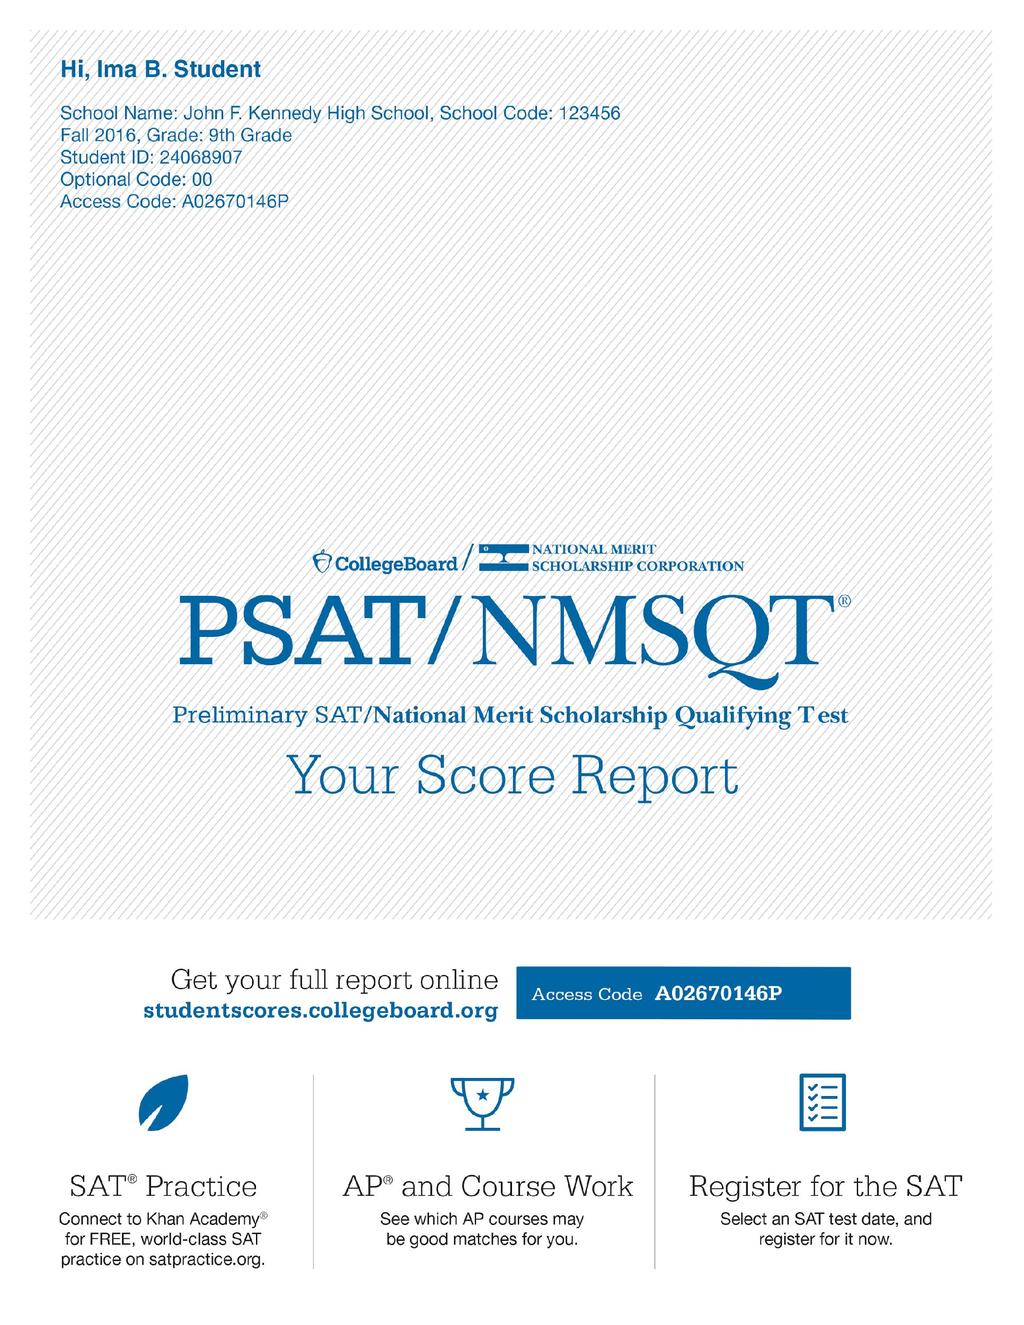 Personalized Skills Information The PSAT/NMSQT Score Report Contains information to help students improve academic skills.